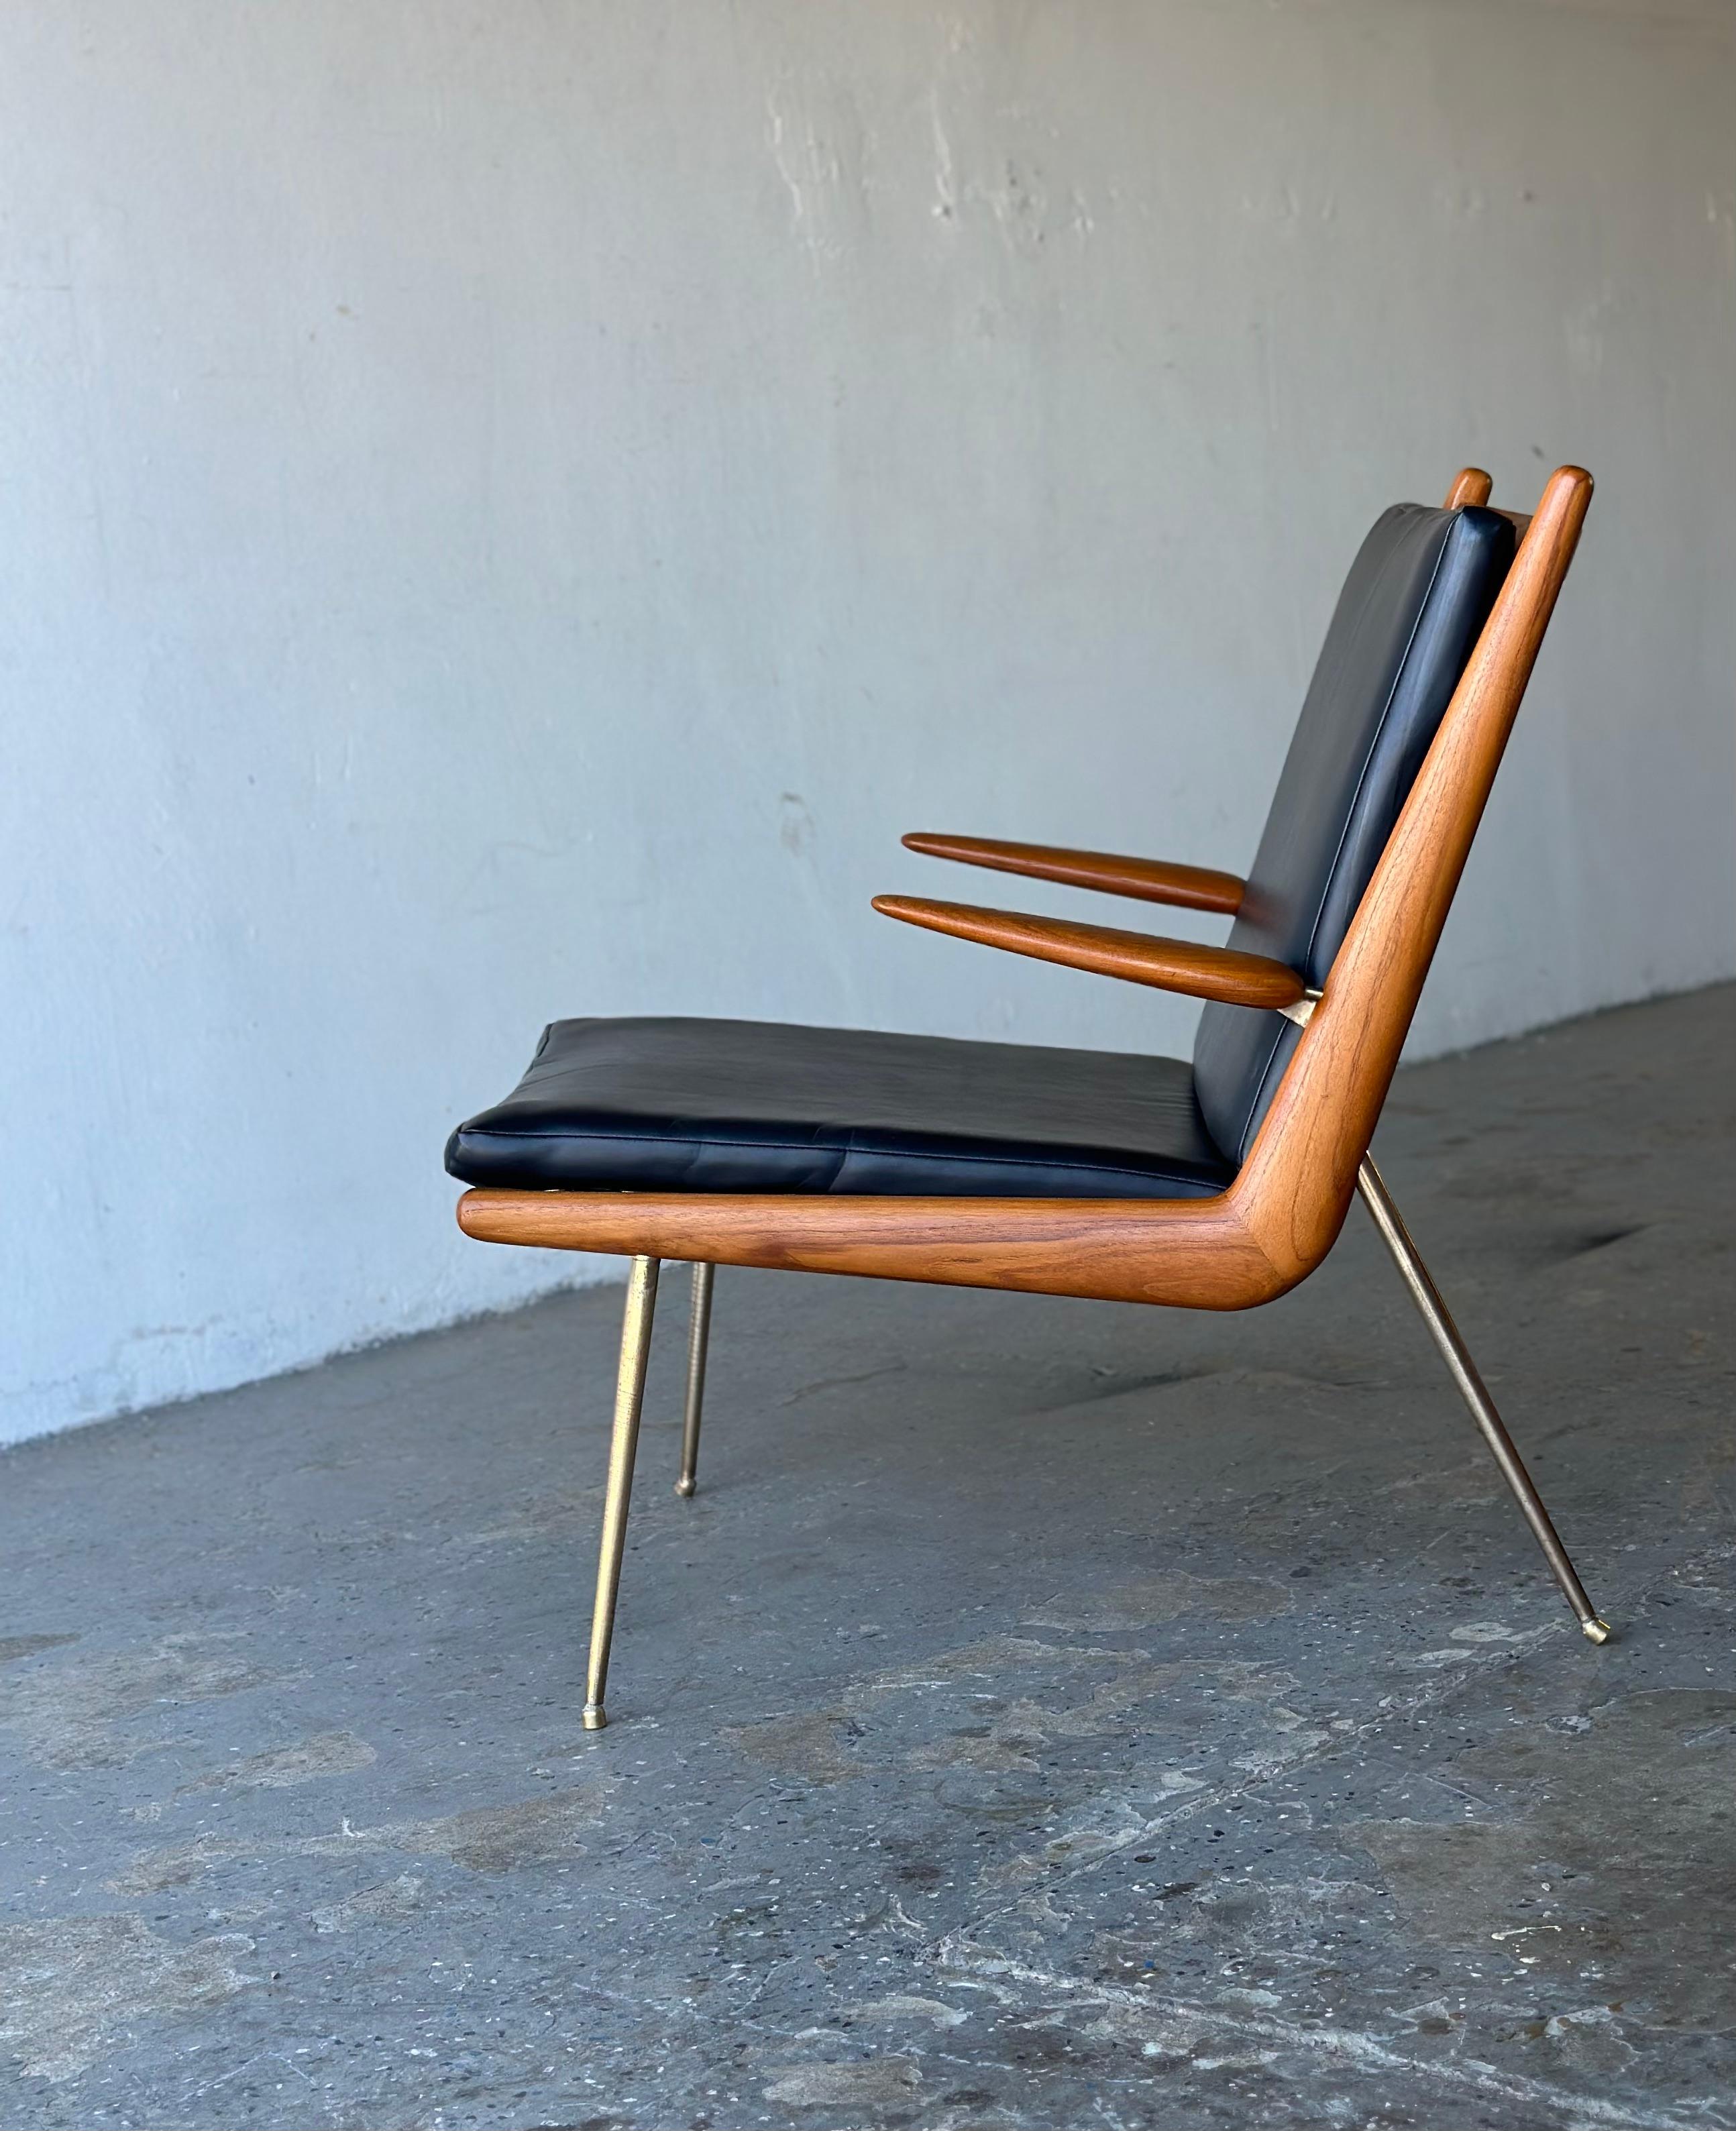 
Designed by Architects Peter Hvidt & Orla Molgaard Nielsen in 1954 the Boomerang chair is one of the most elegant chair designs of the Mid Century period. Often looking more Italian than Danish in origin the beautifully crafted frame stands on slim